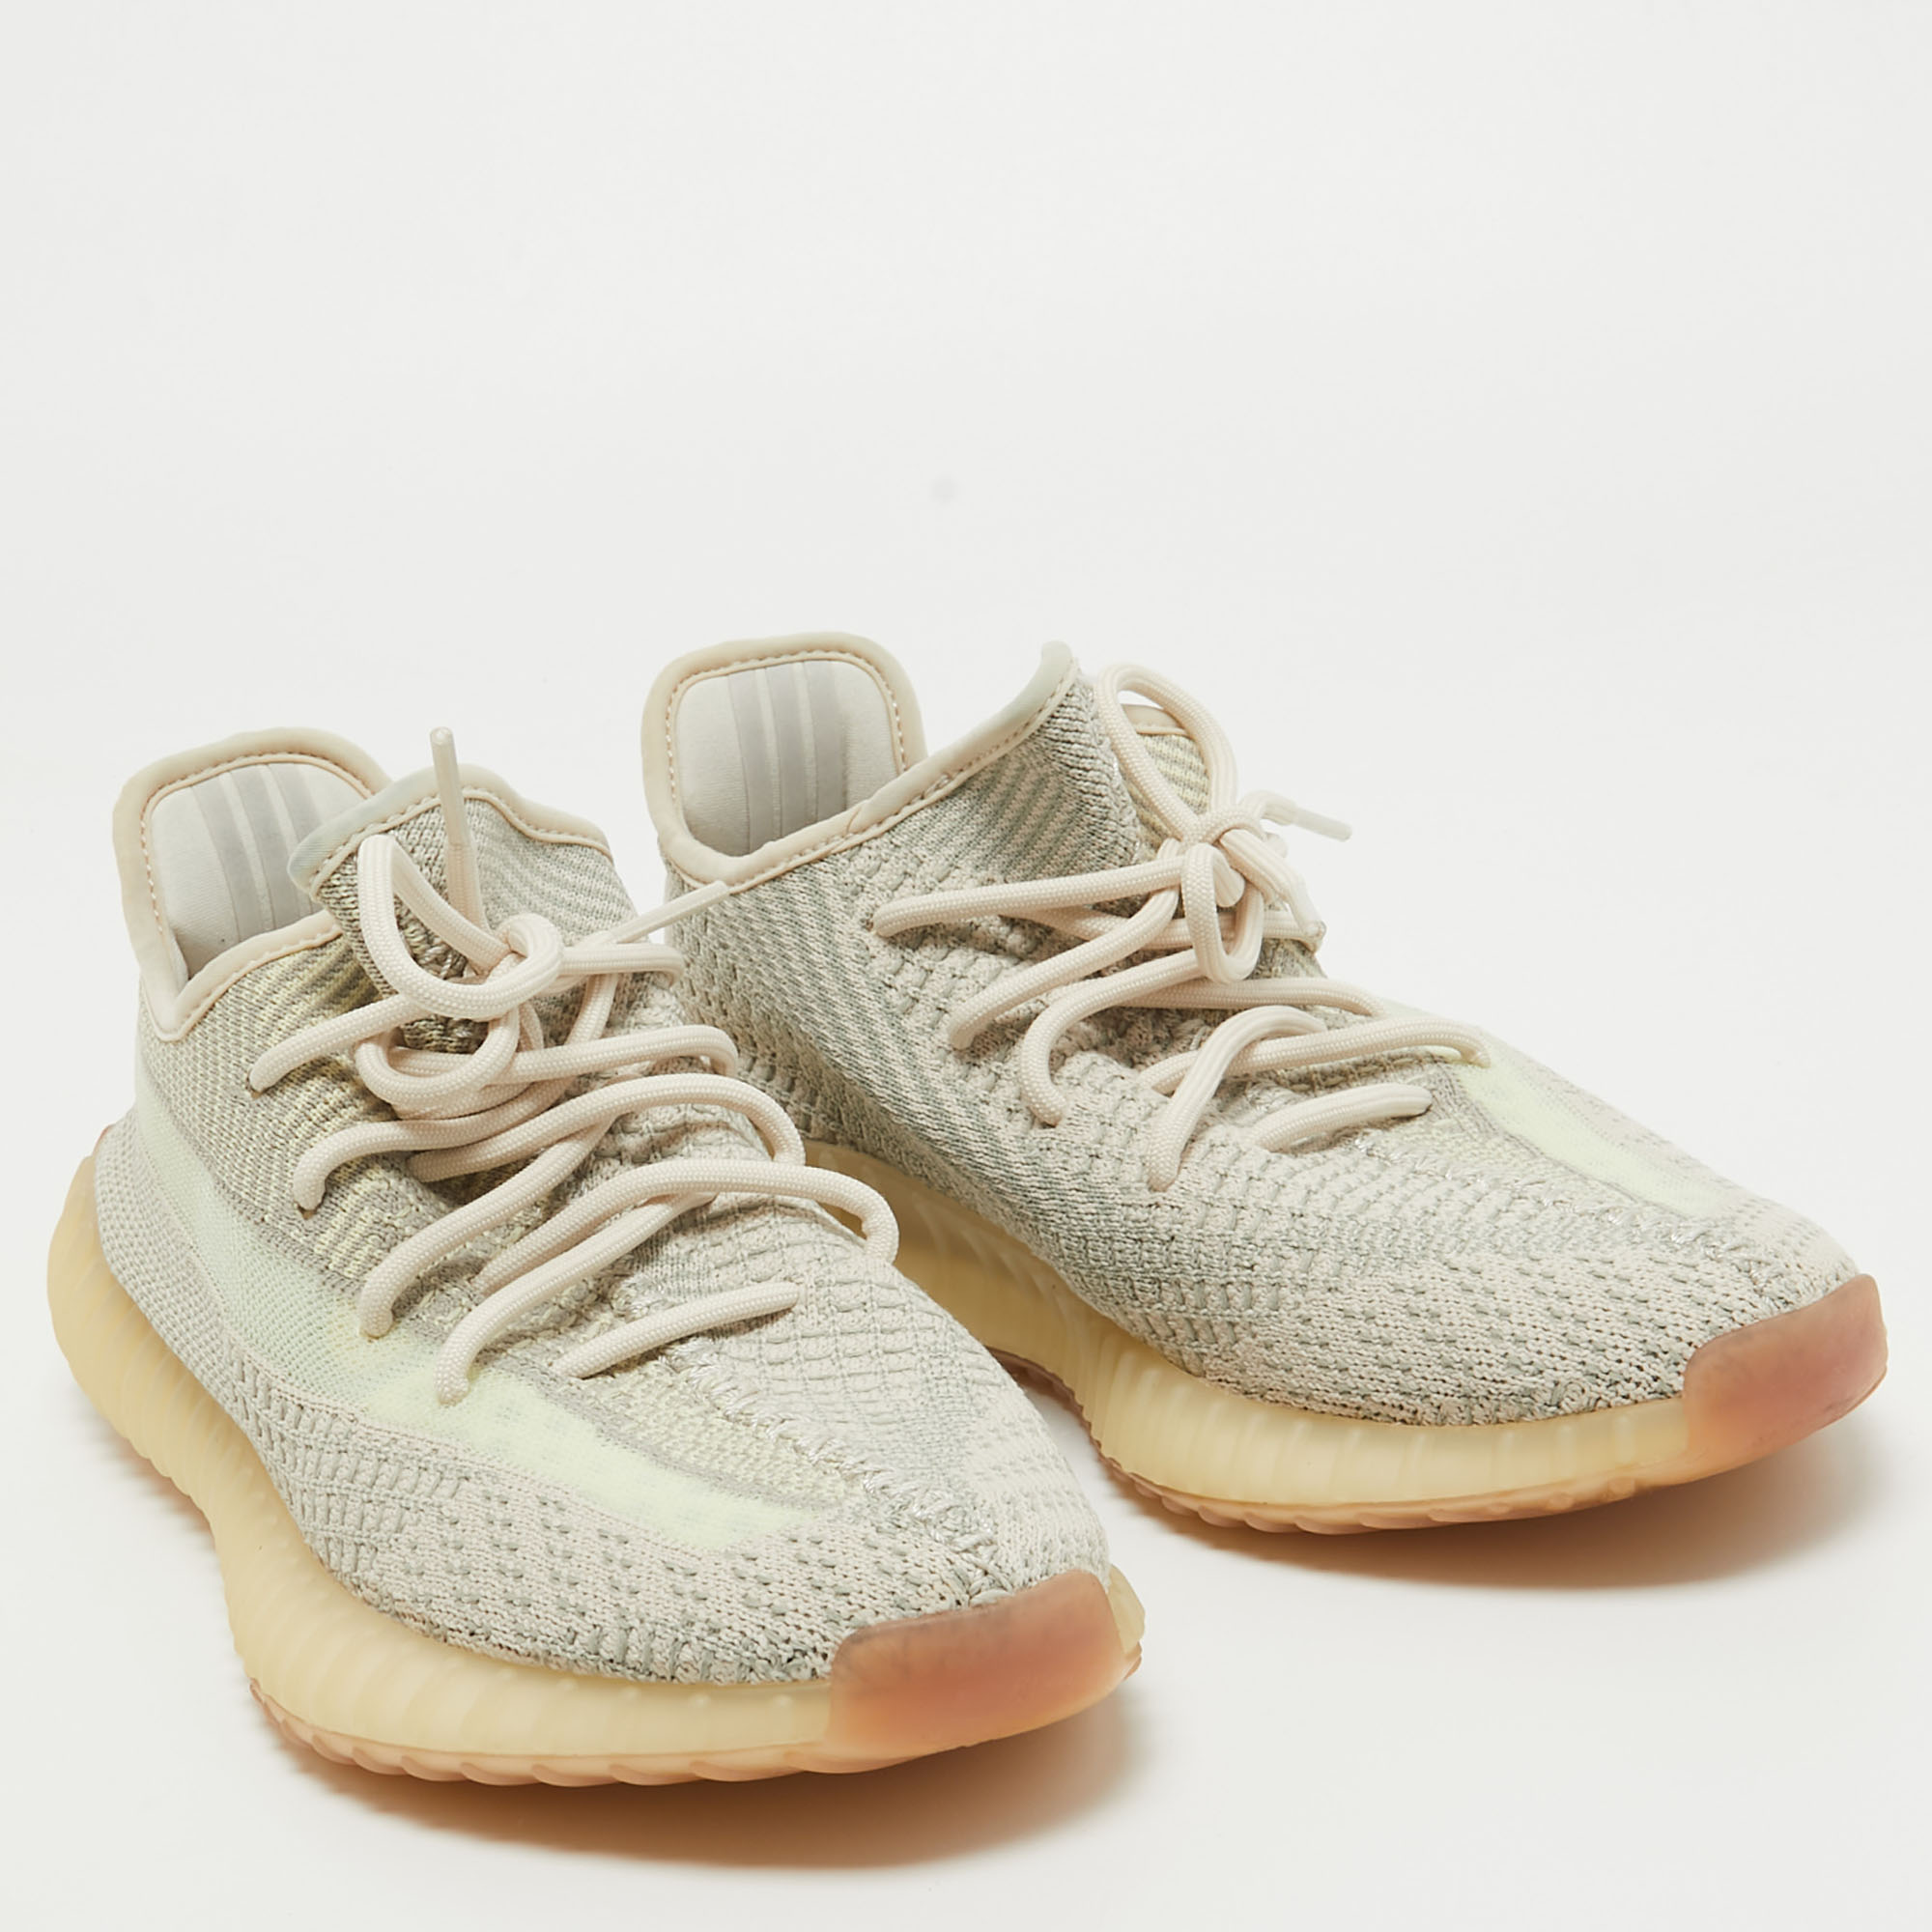 Yeezy X Adidas Beige Knit Fabric Boost 350 V2Blue Tint Sneakers Size 42 2/3